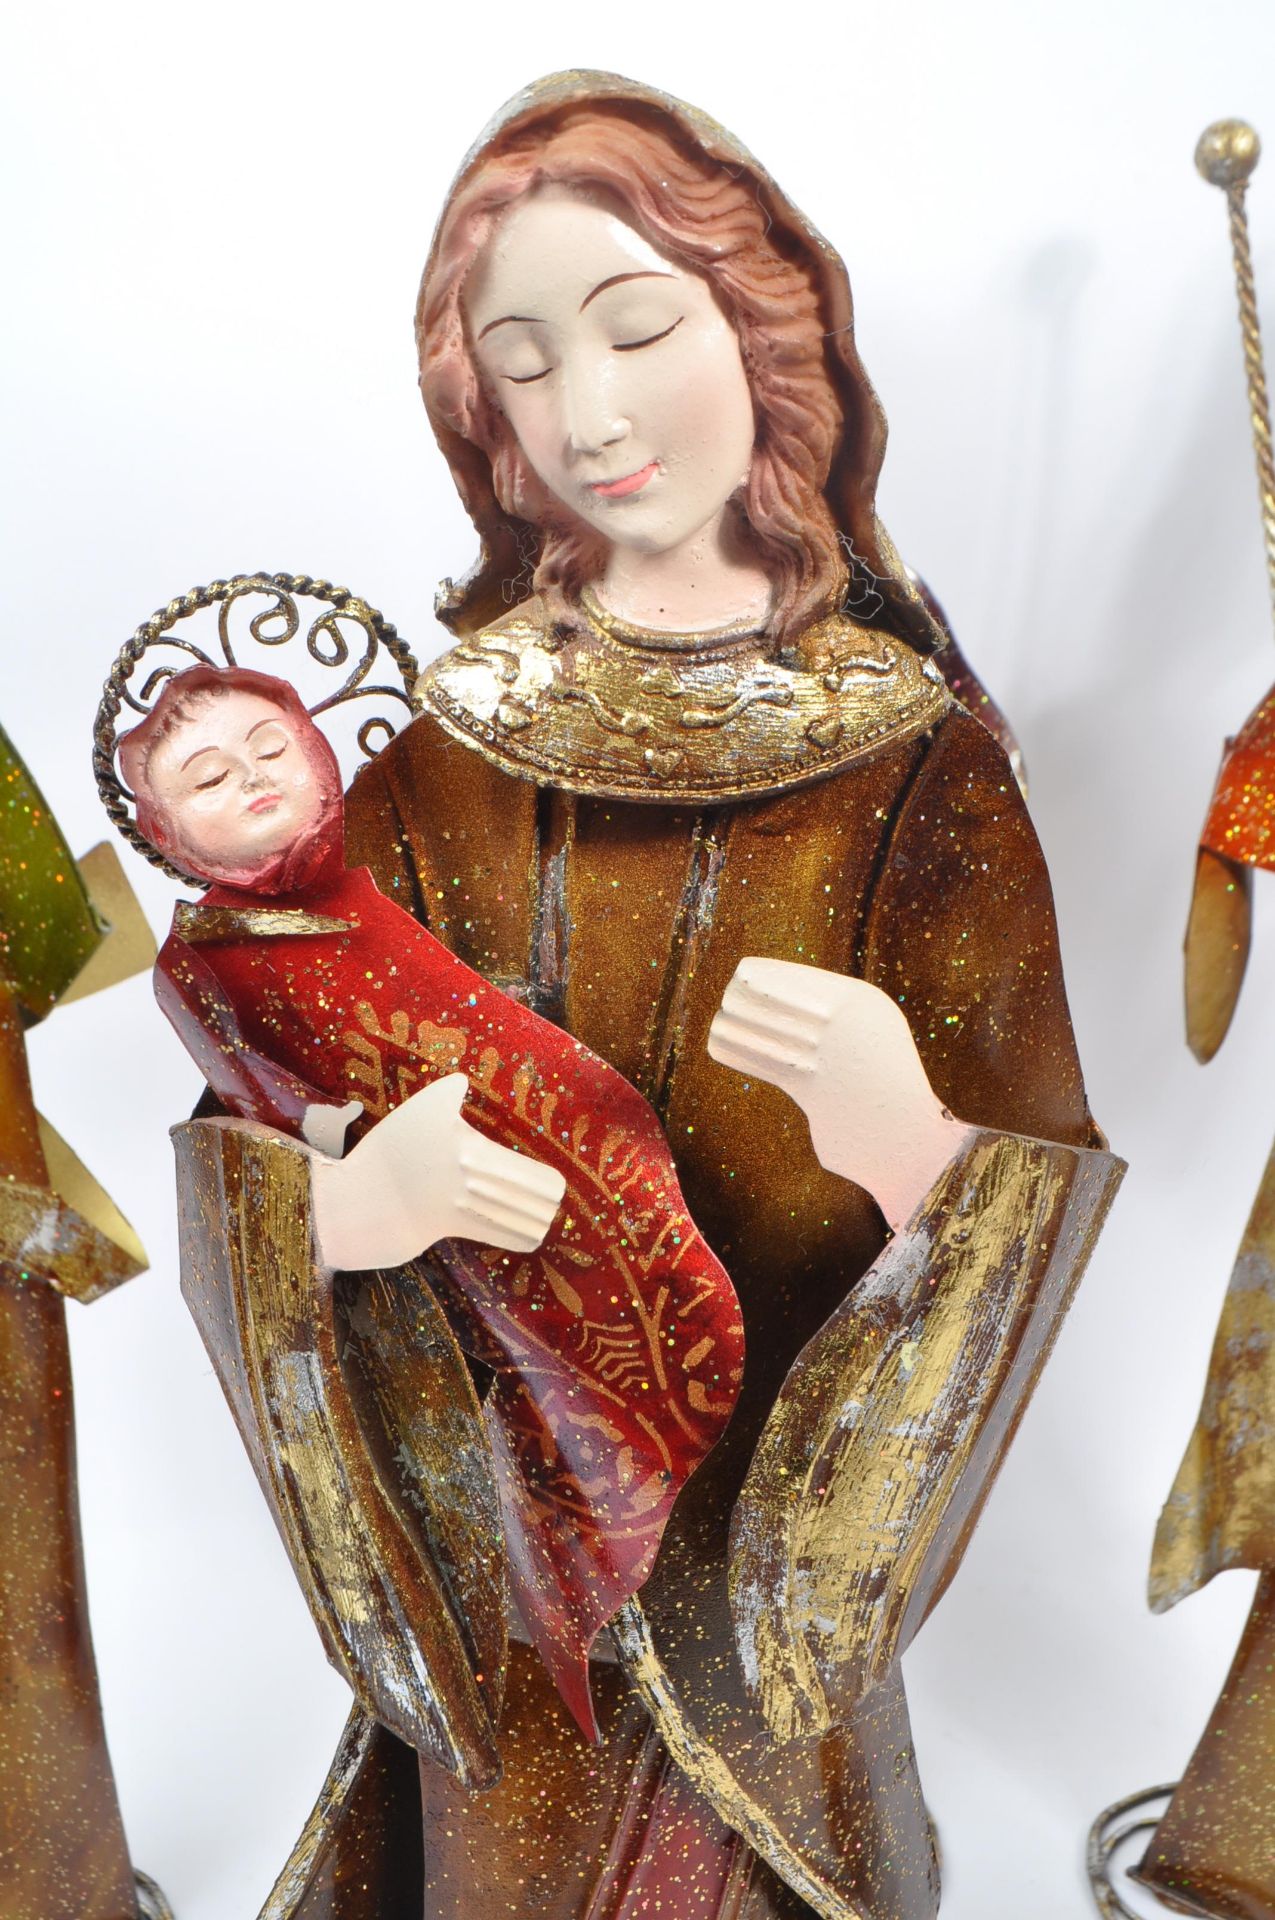 COLLECTION OF CHRISTMAS DECORATIONS RELIGIOUS FIGURES - Image 6 of 8